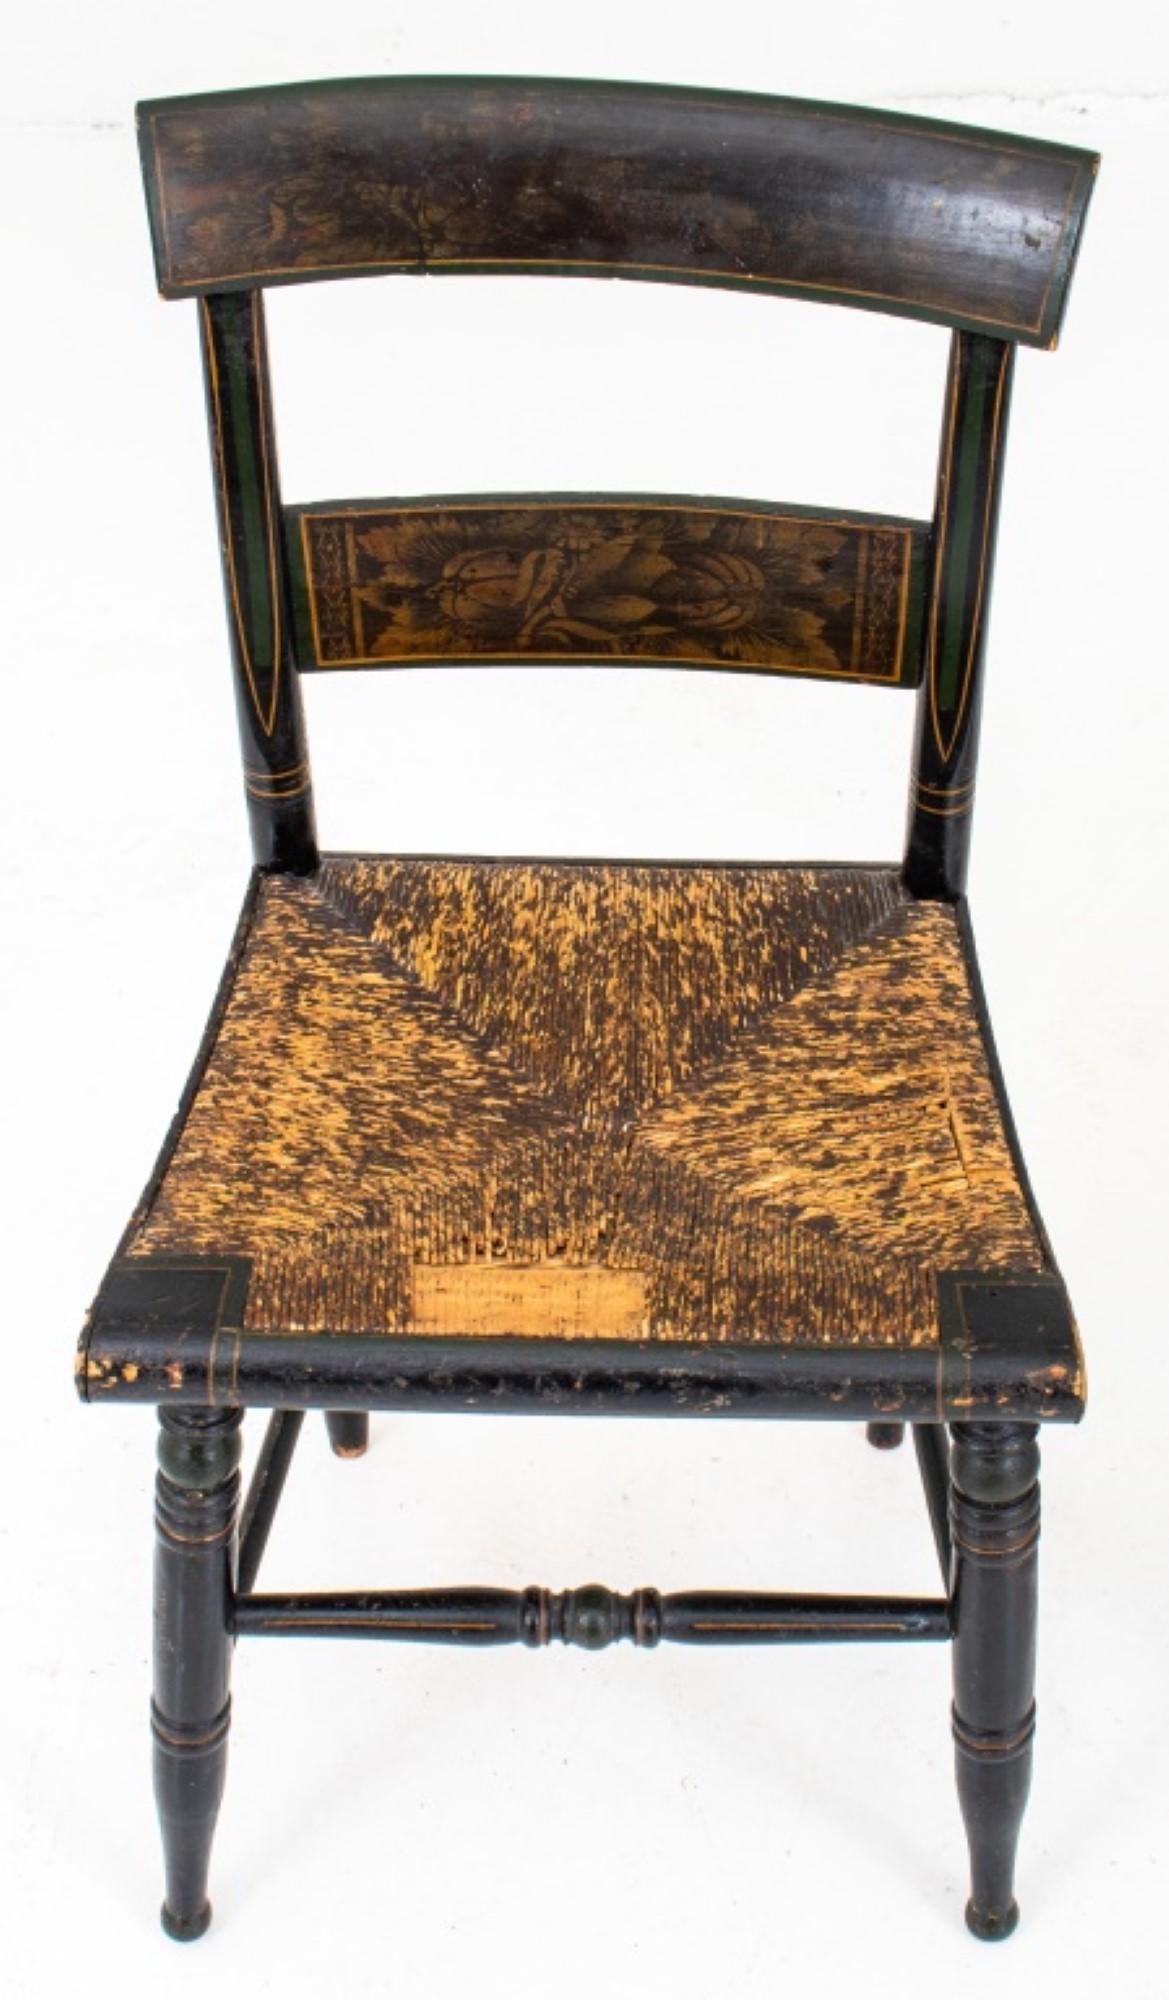 American stenciled and ebonized sidechairs in the folk manner, 19th c, set of six, with decorated crest rail and back splat on turned legs joined by stretchers.

Dealer: S138XX